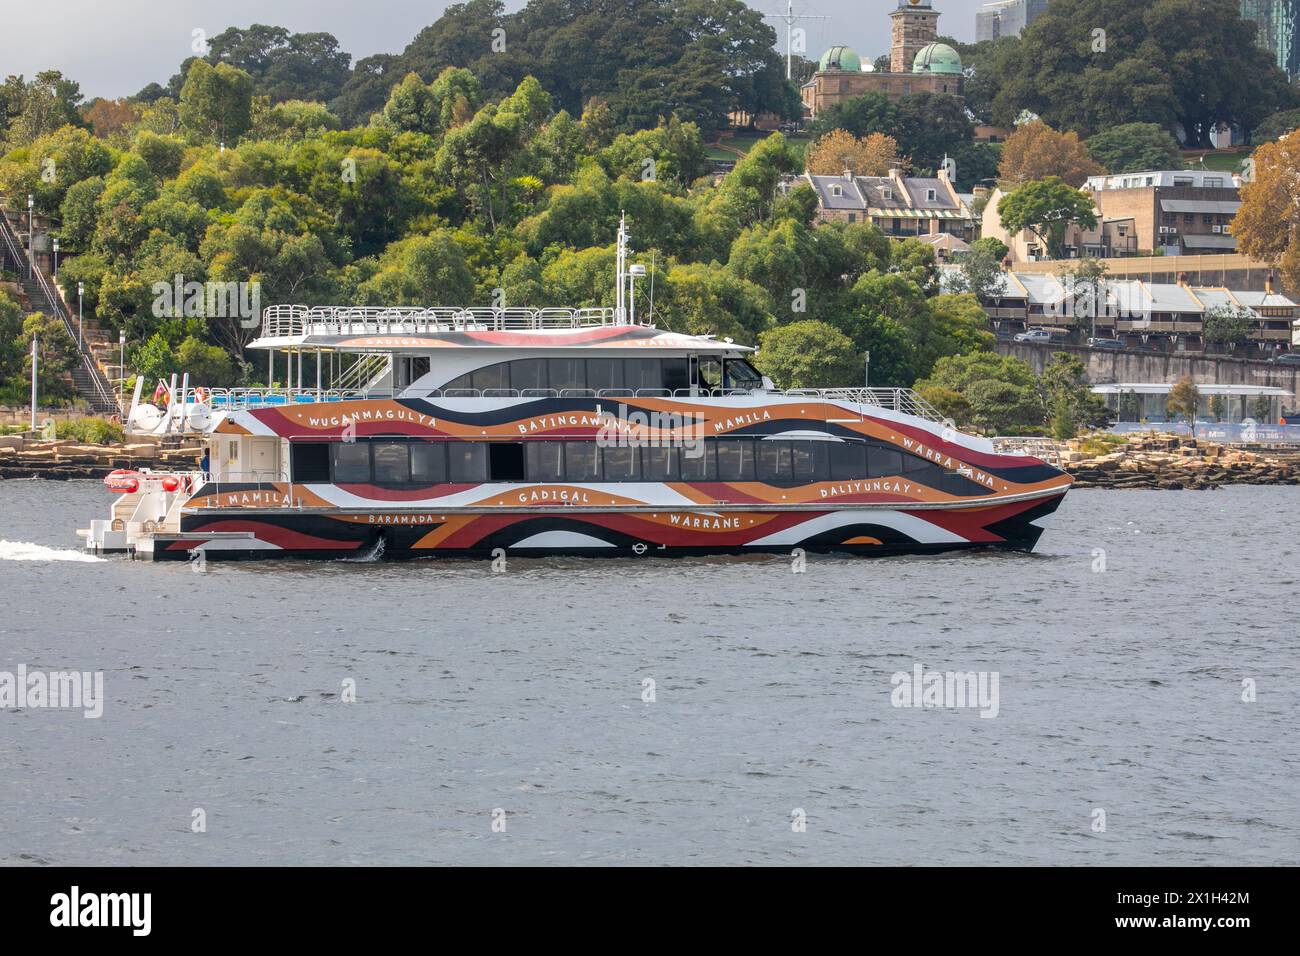 Sydney whale watching vessel, Ocean Dreaming 2, which is wrapped by Warwick Keen wave design representing aboriginal clans around Sydney Harbour Stock Photo